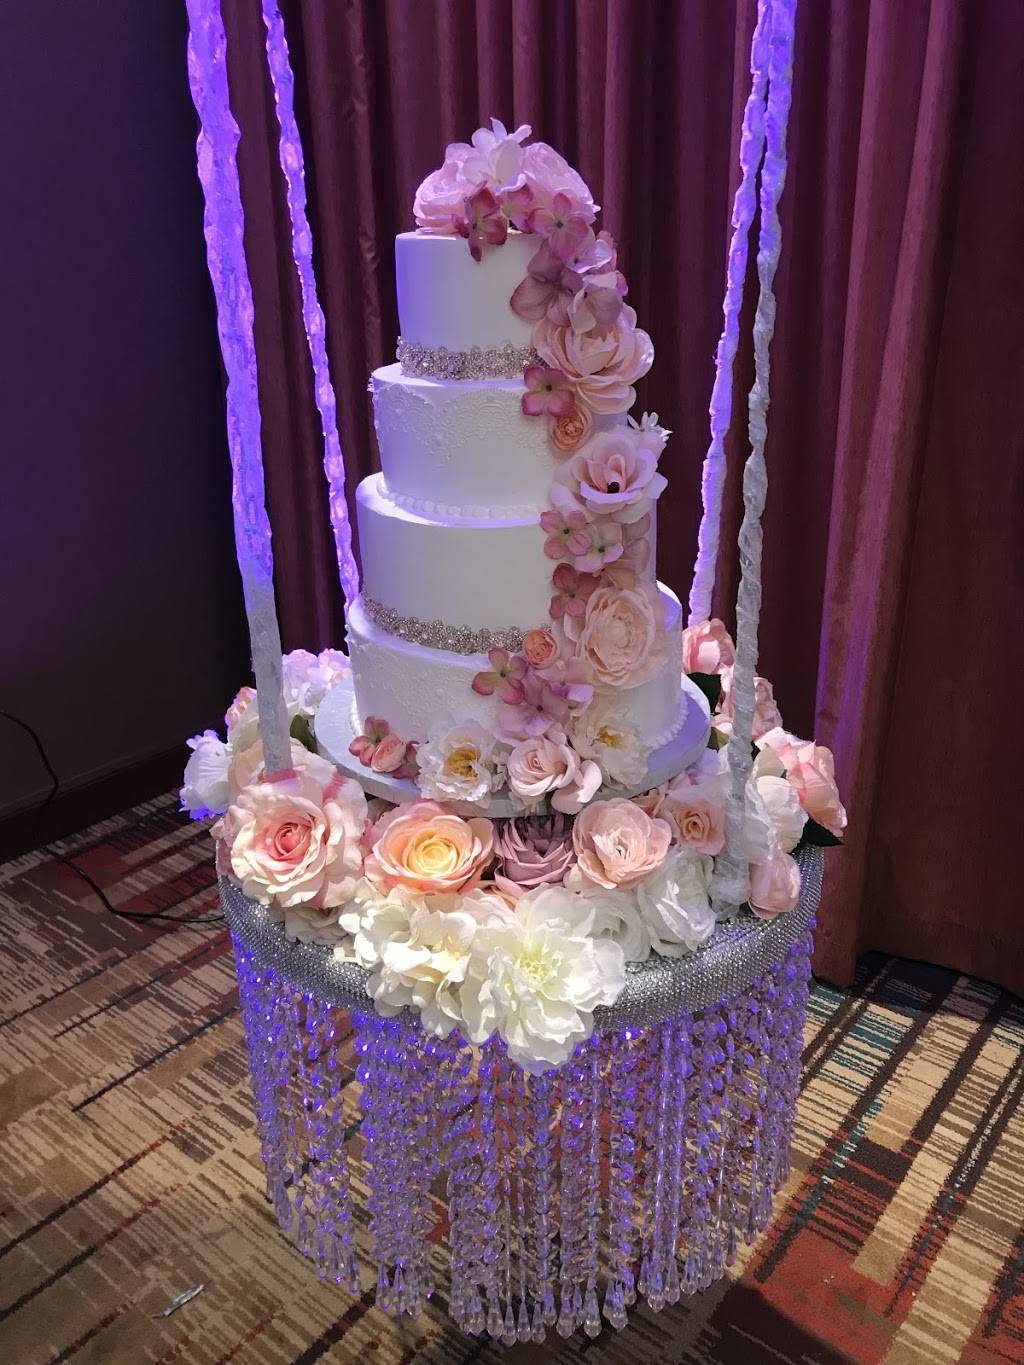 Genesis Decorations and Cakes | 4322 4th St NW, Albuquerque, NM 87107, USA | Phone: (505) 450-3845